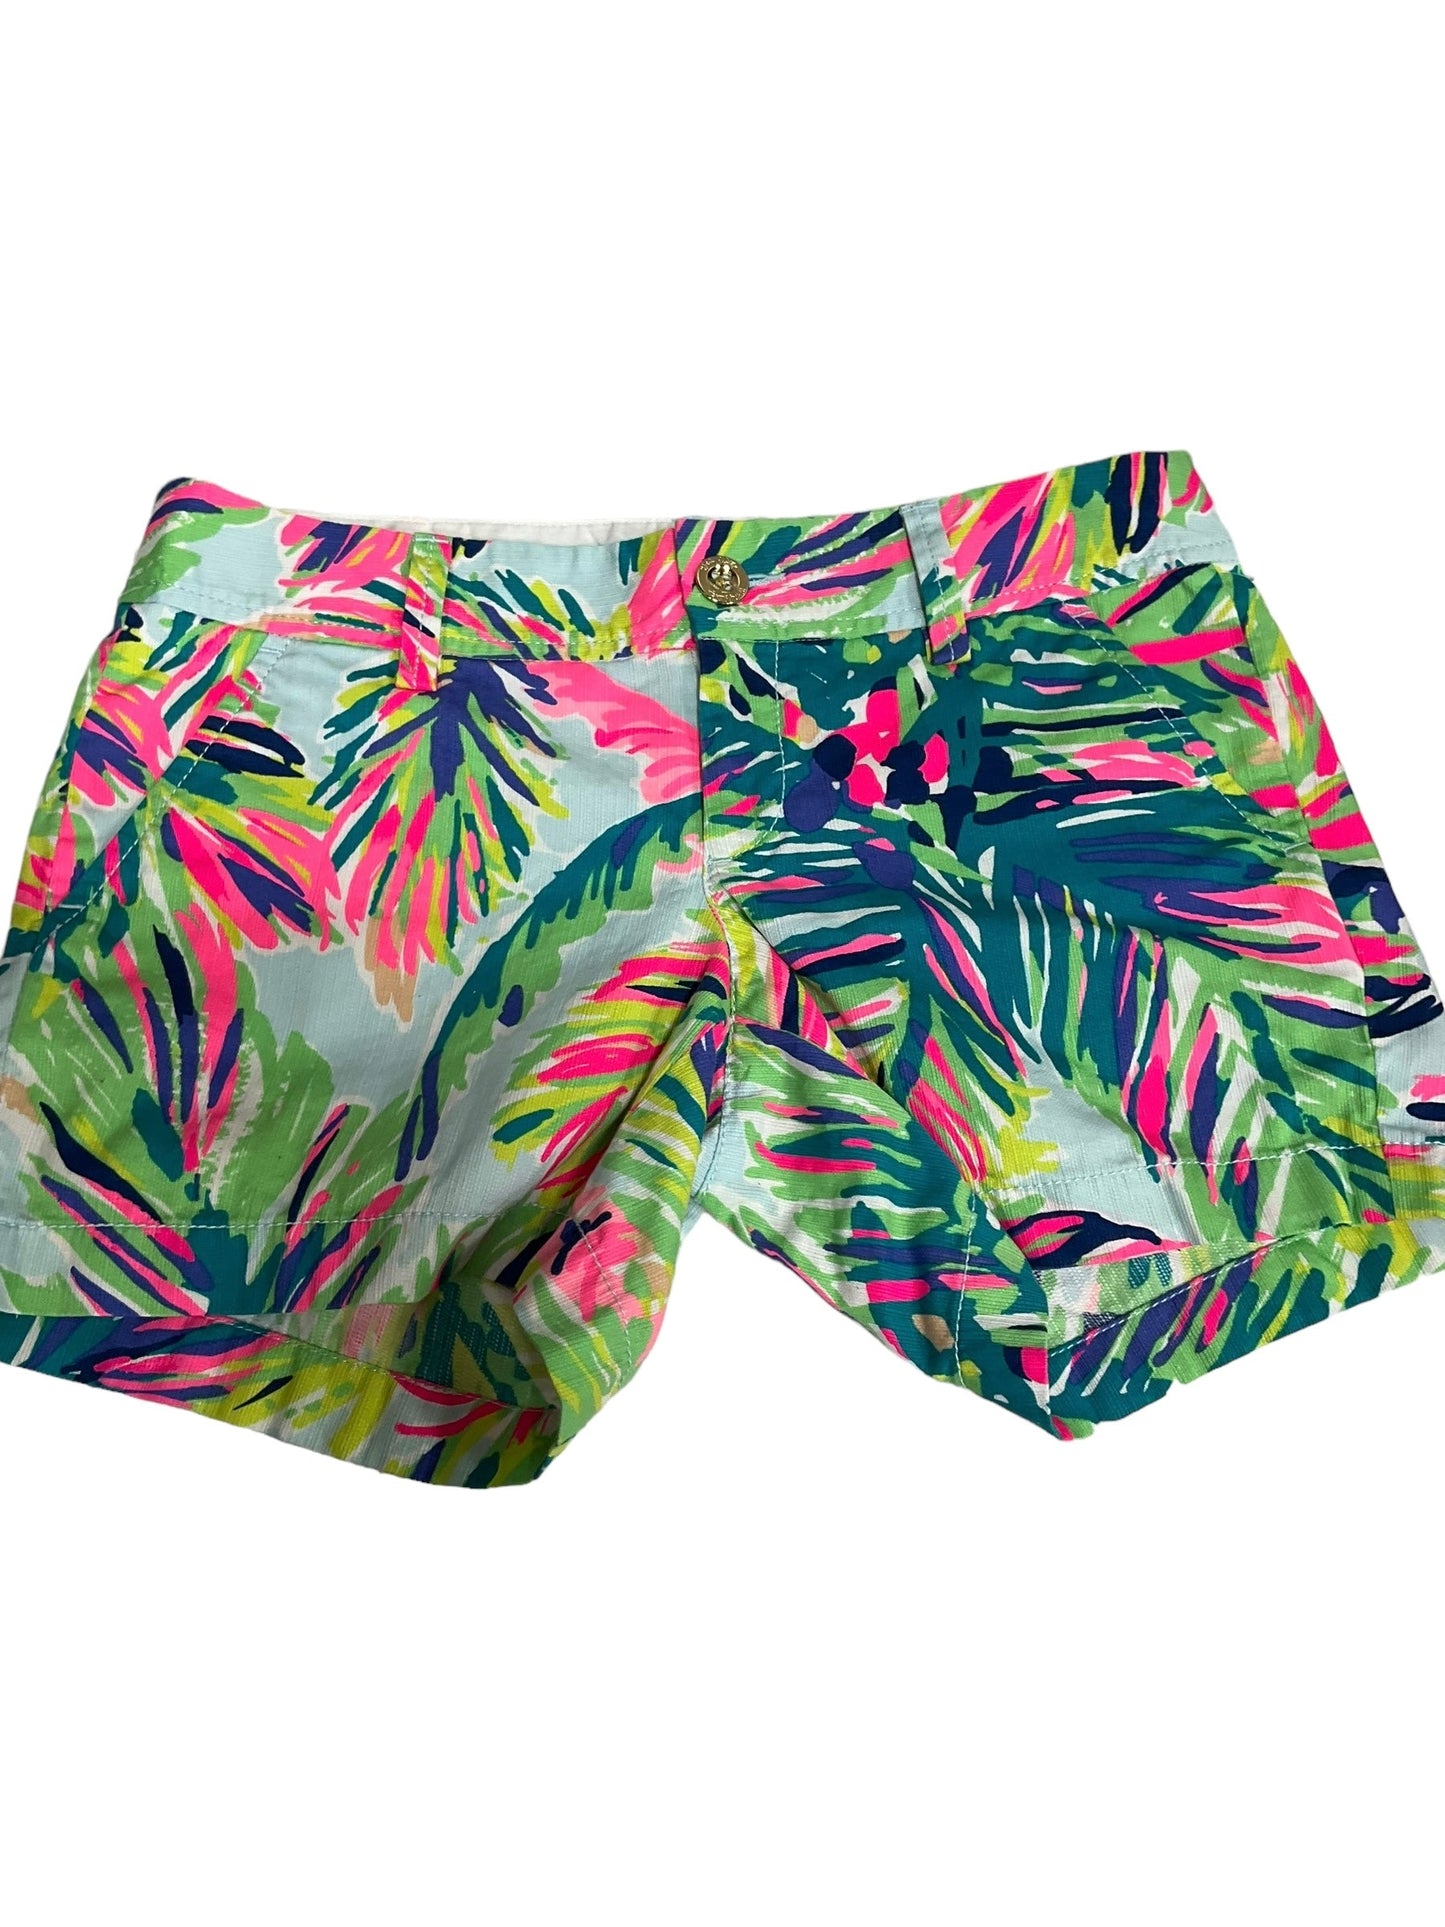 Multi-colored Shorts Designer Lilly Pulitzer, Size 2